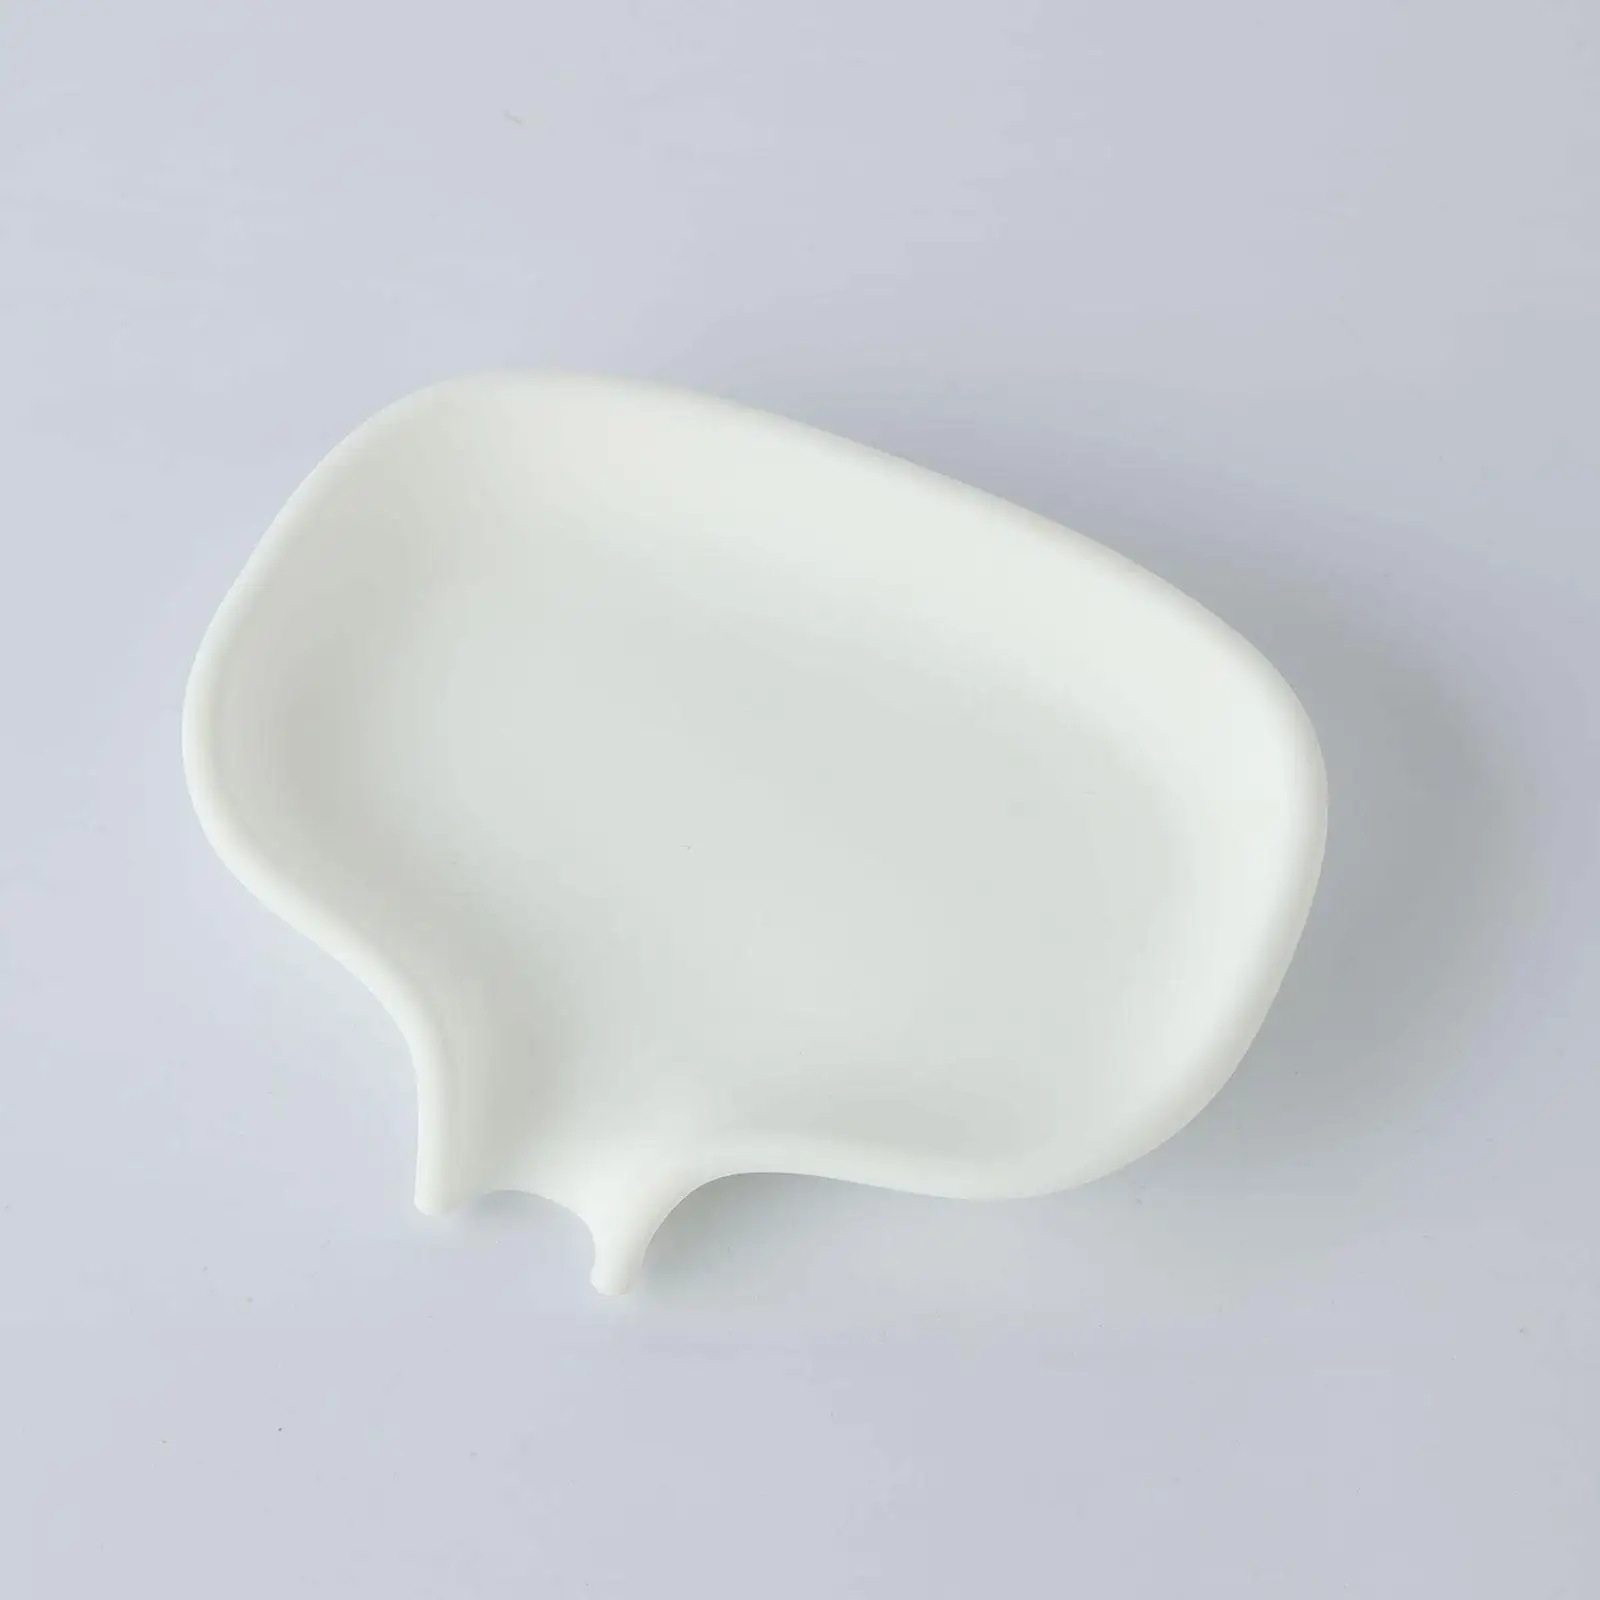 Freestanding Soap Dish Soap Holder Self Draining Soap Tray Easy to Clean for Bathroom Washroom Shower Hotel Decoration